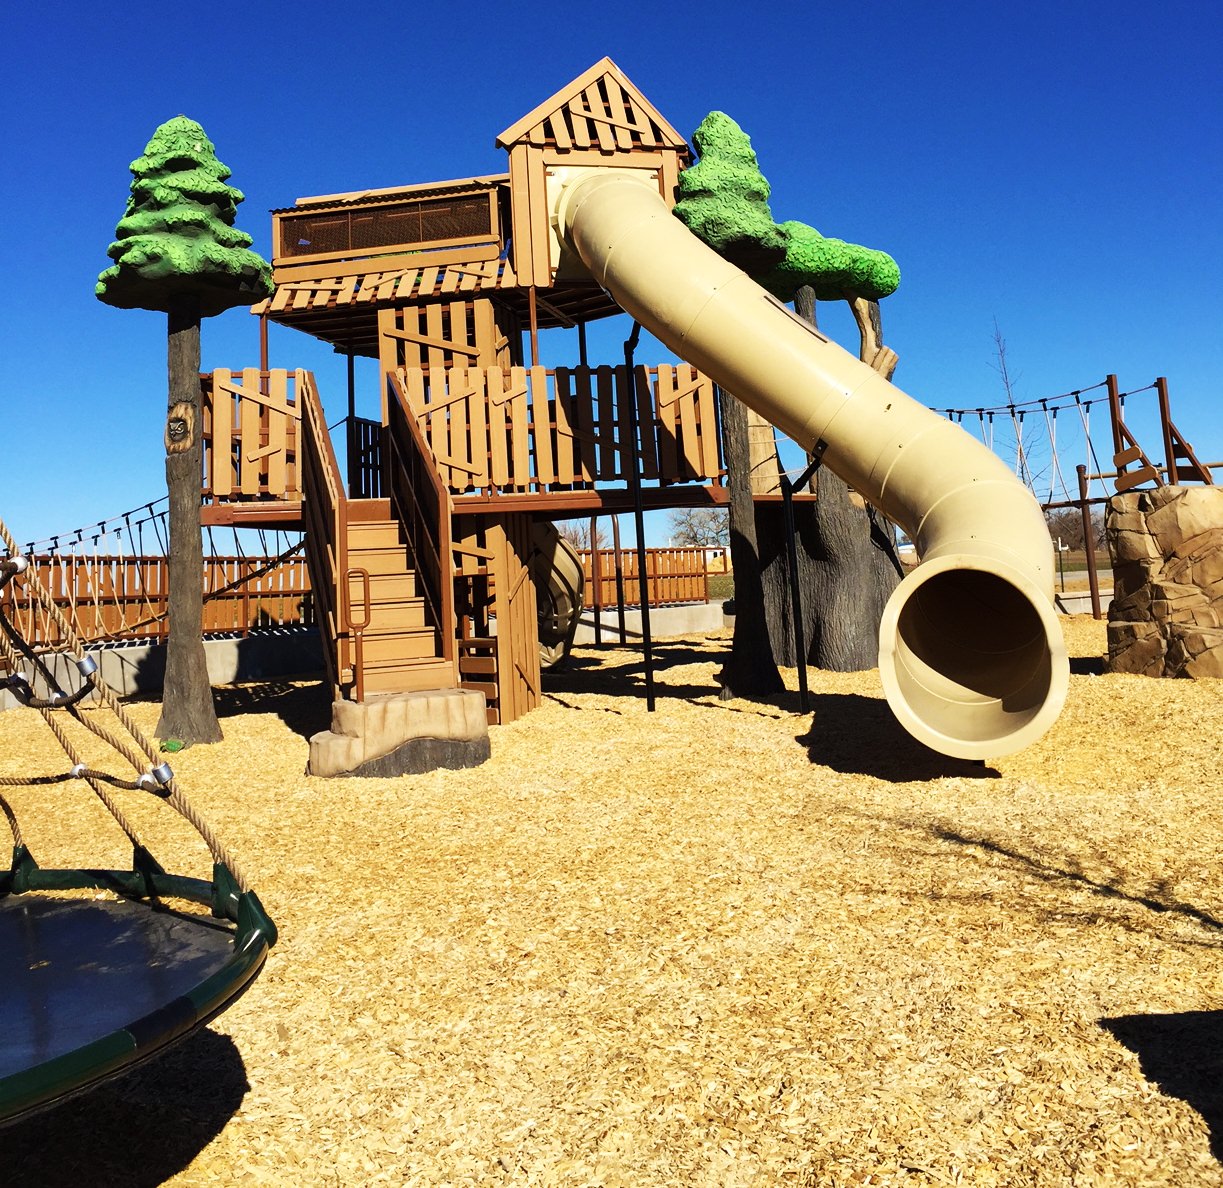 Custom Playground Equipment by PlayIt Creations